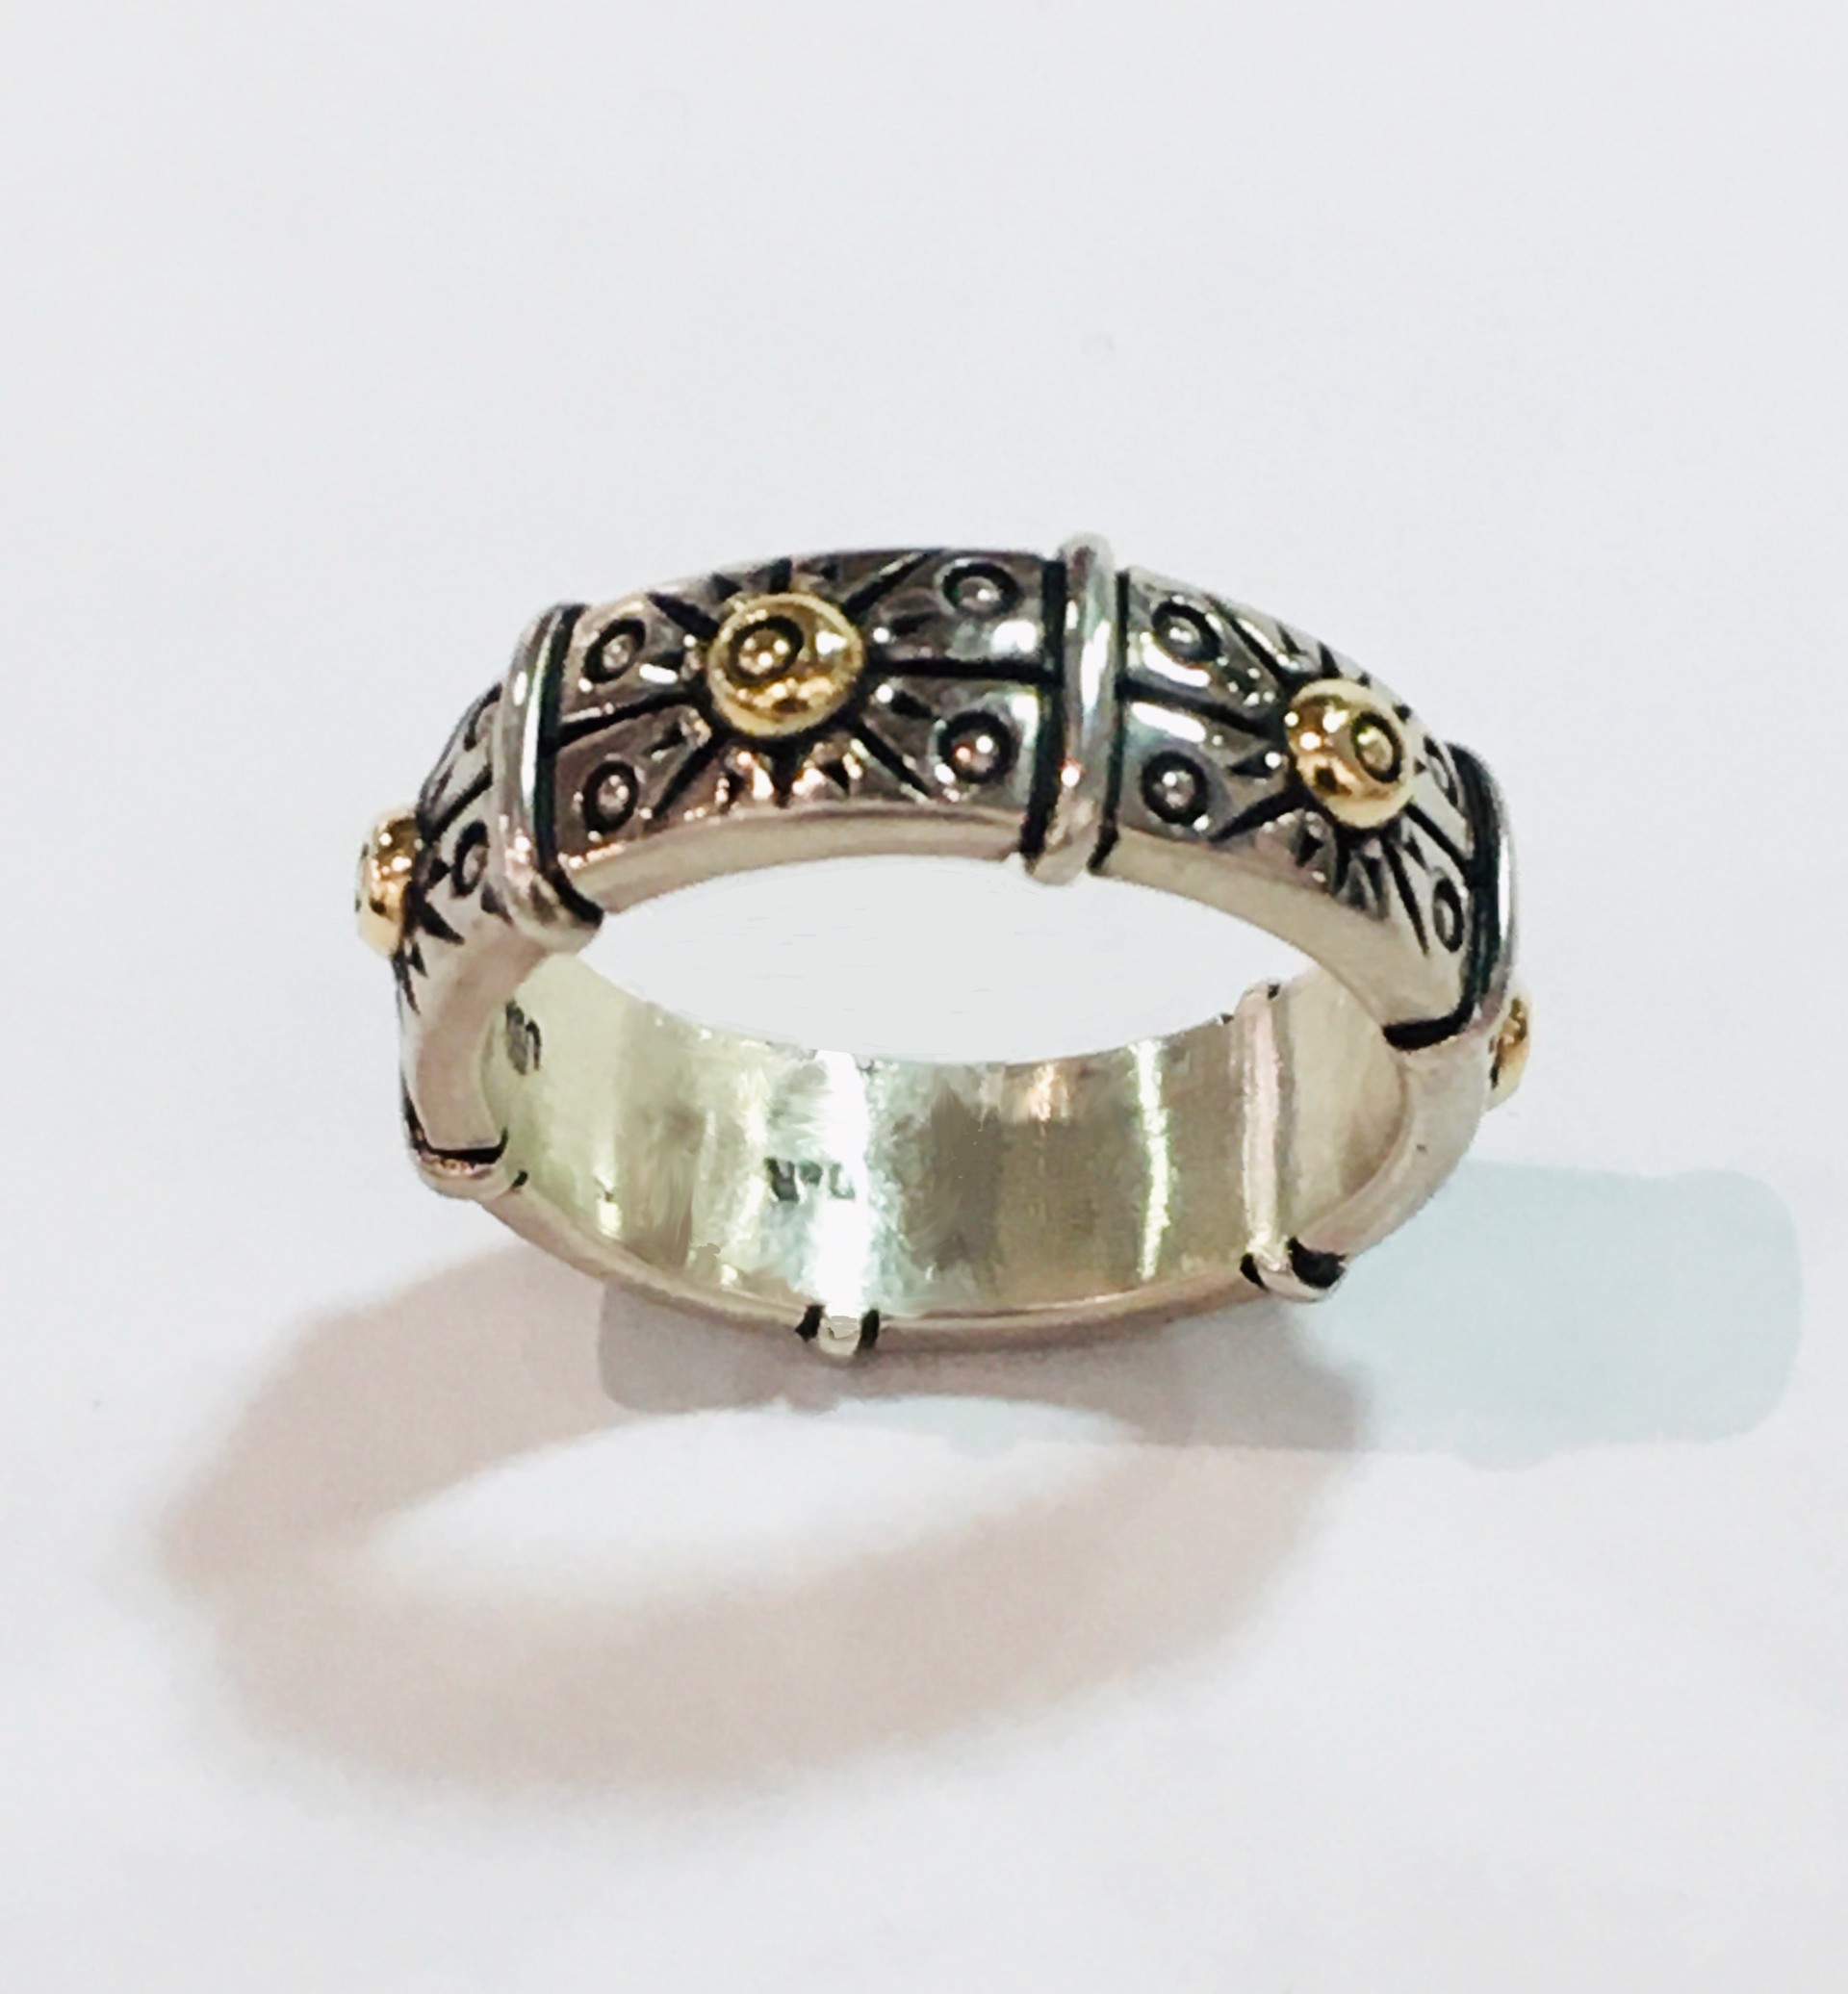 Silver and Gold Ring by DAVID & RONNIE